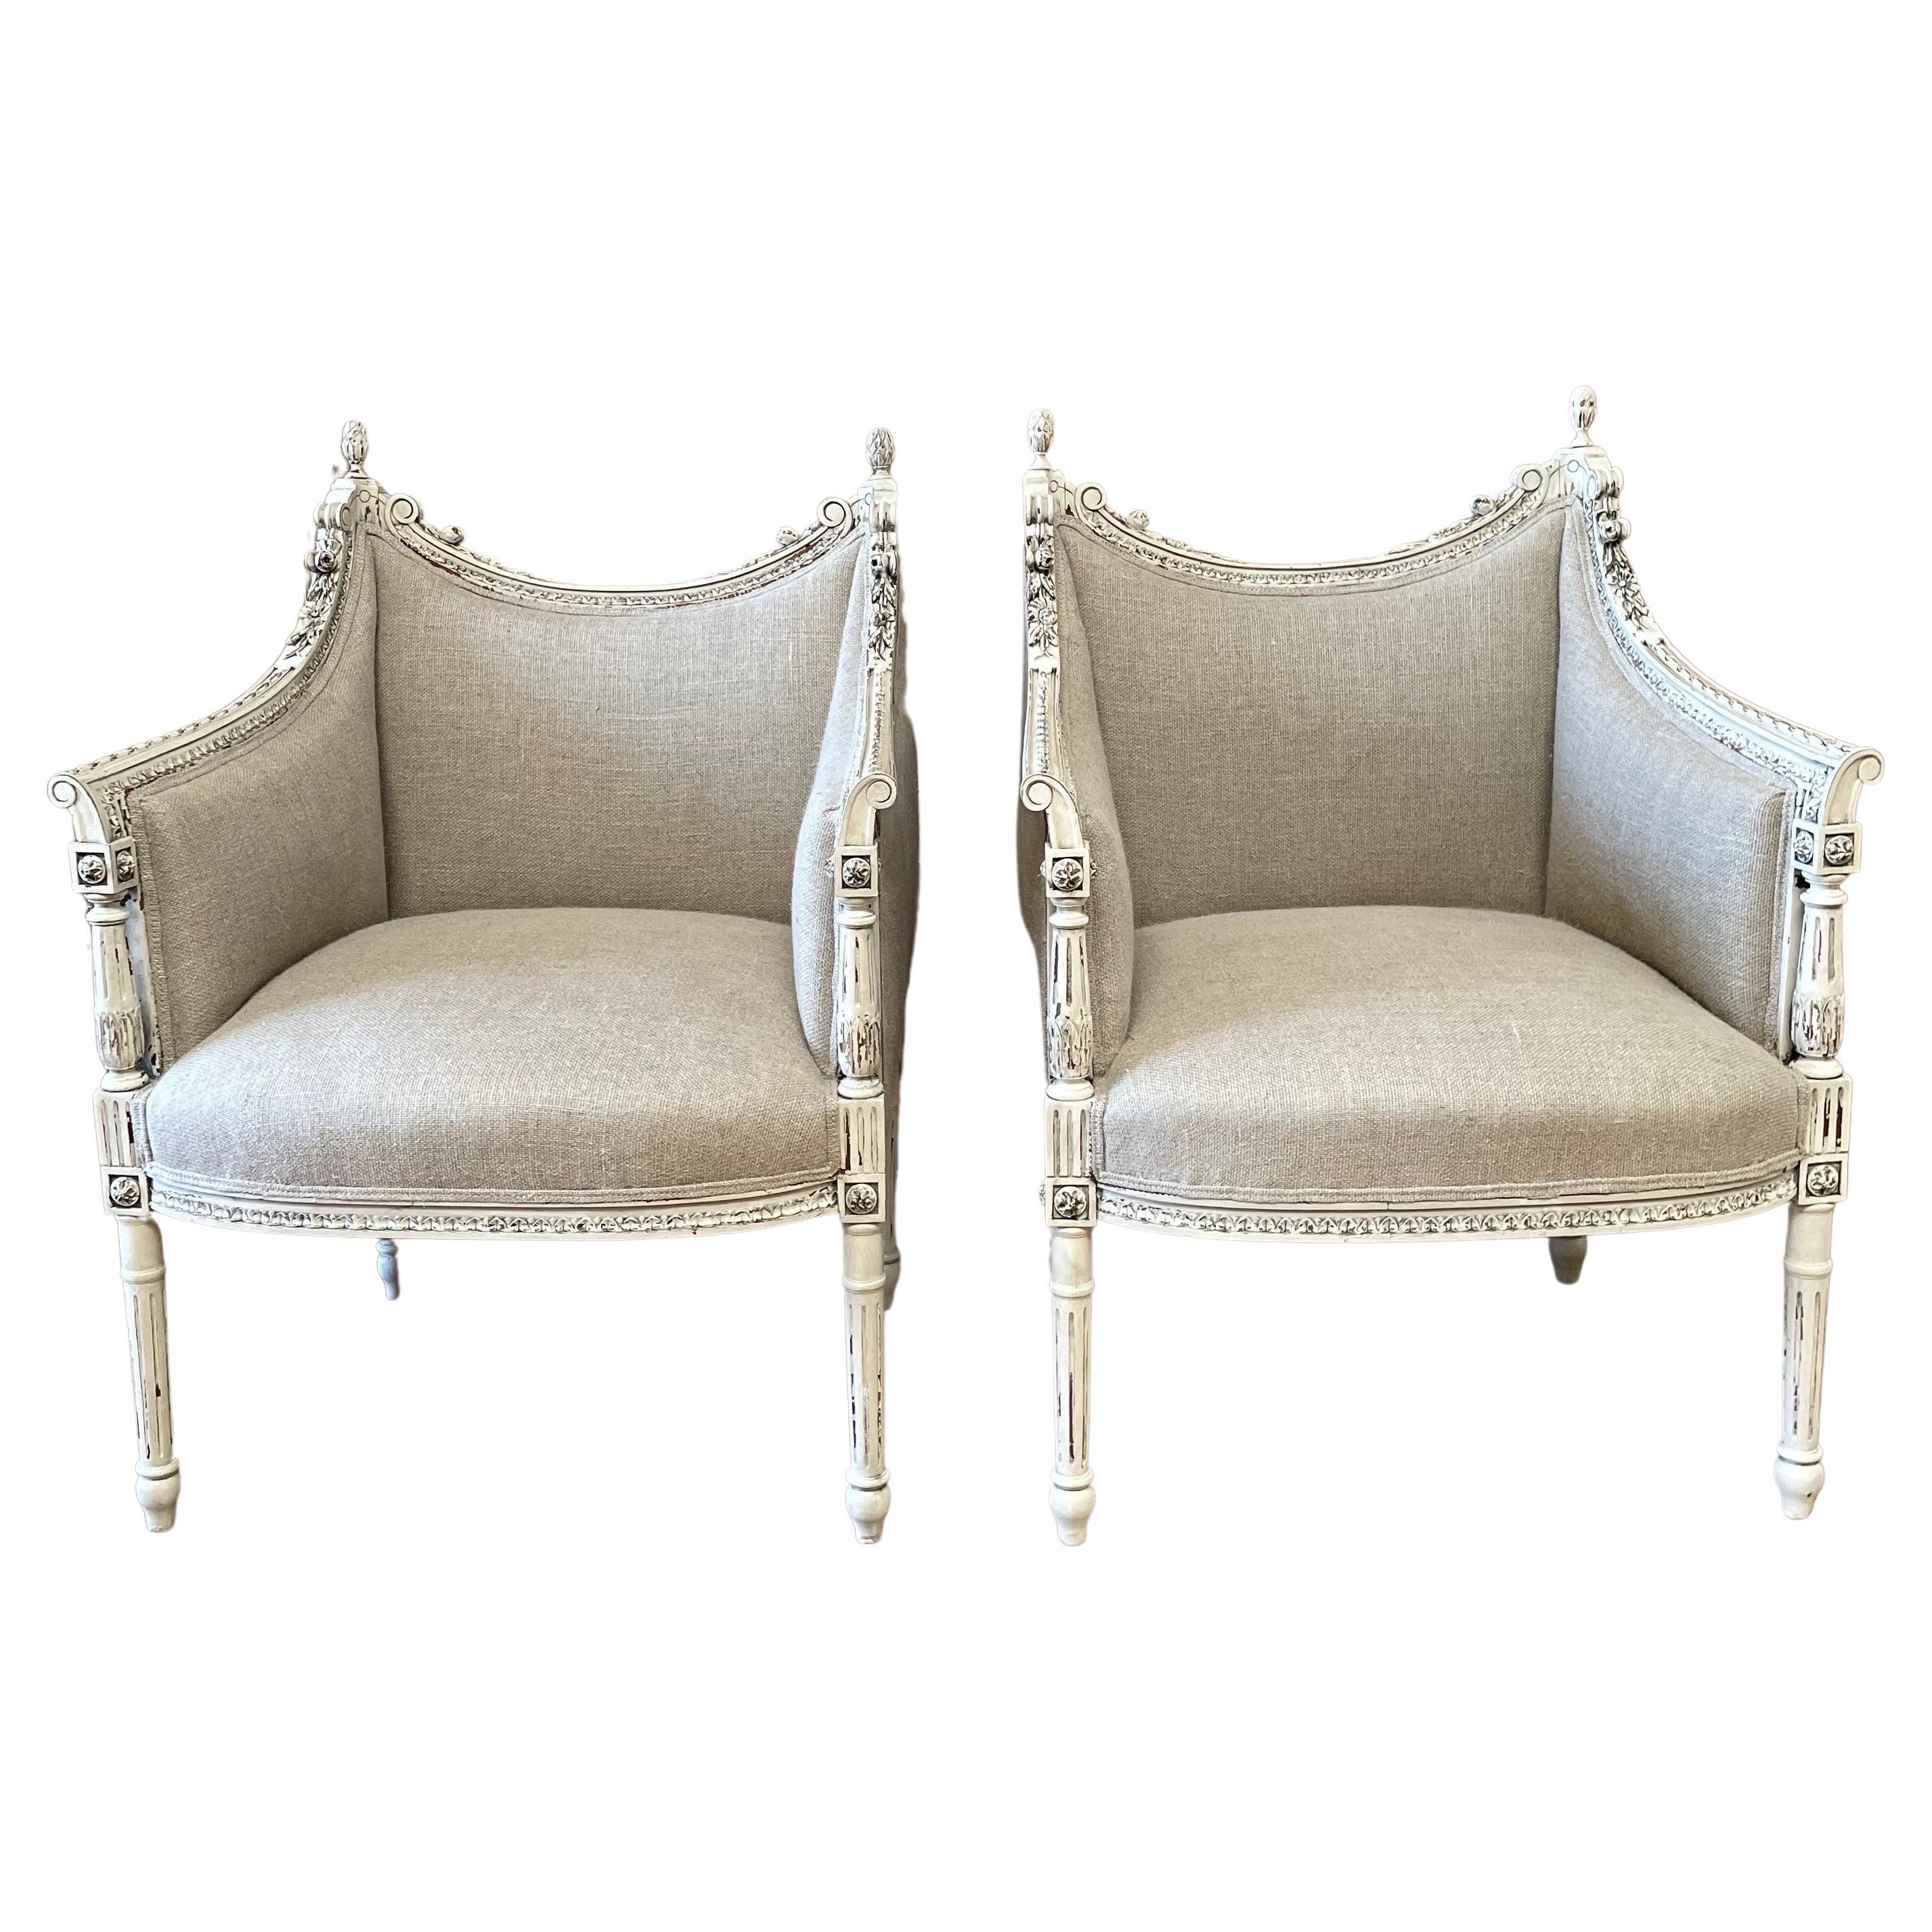 Pair of Antique Louis XVI Style Chairs Upholstered in Irish Natural Linen For Sale